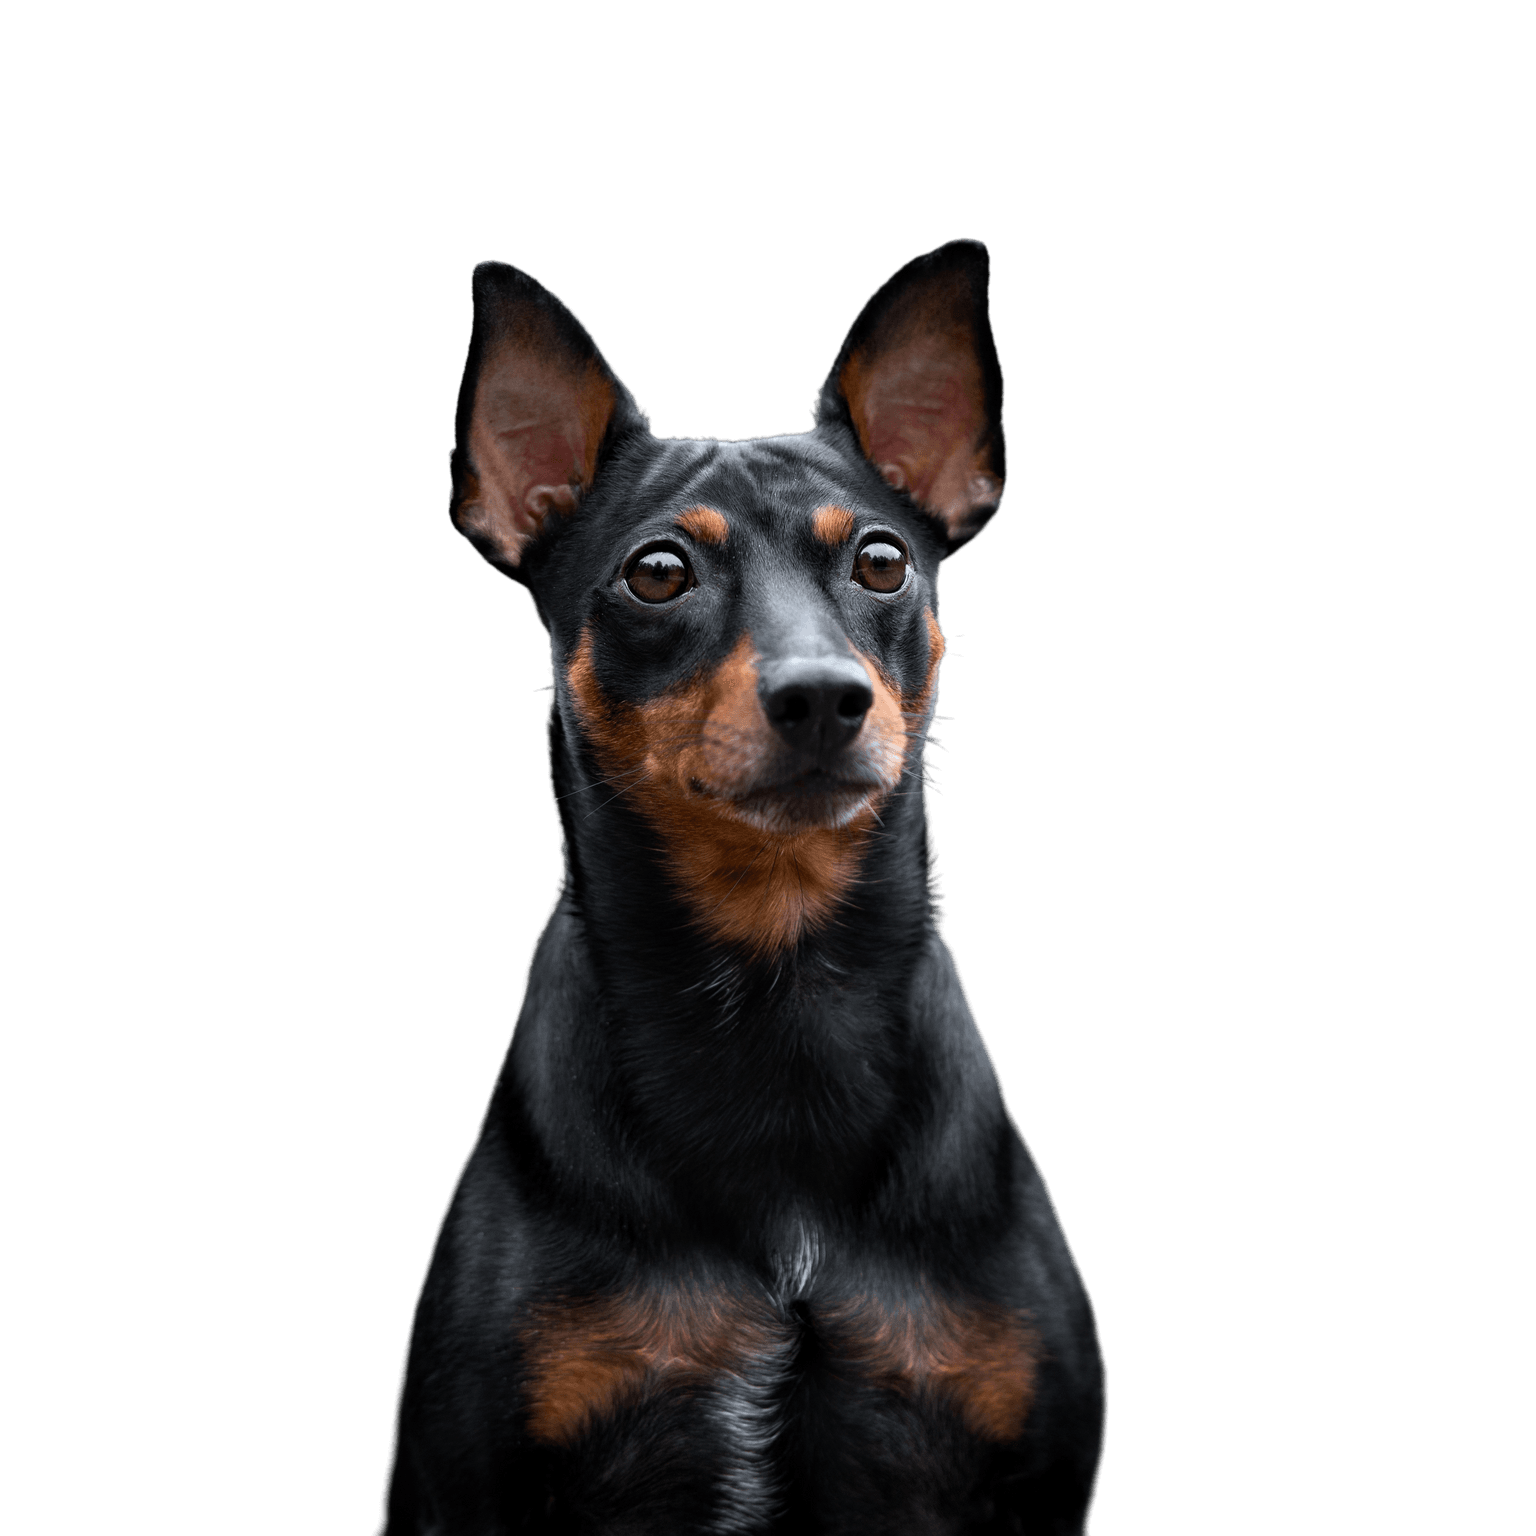 Breed description of Pinscher, Austrian Pinscher, German Pinscher, small German dog breed, dog similar to Doberman, black and brown dog breed with prick ears and short coat, calf biting dog